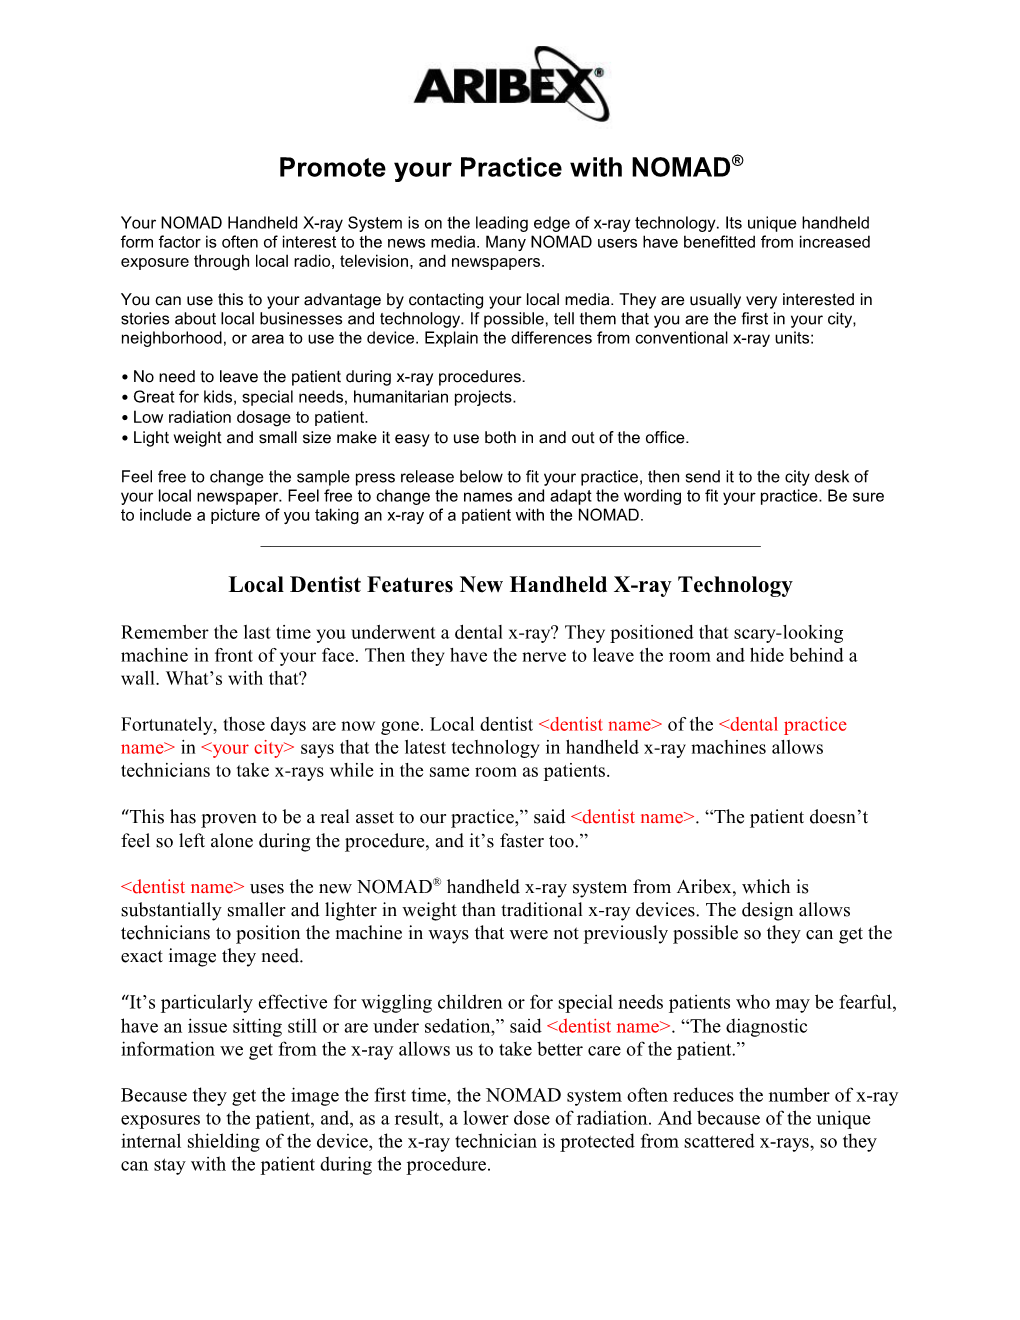 Promote Your Practice with NOMAD